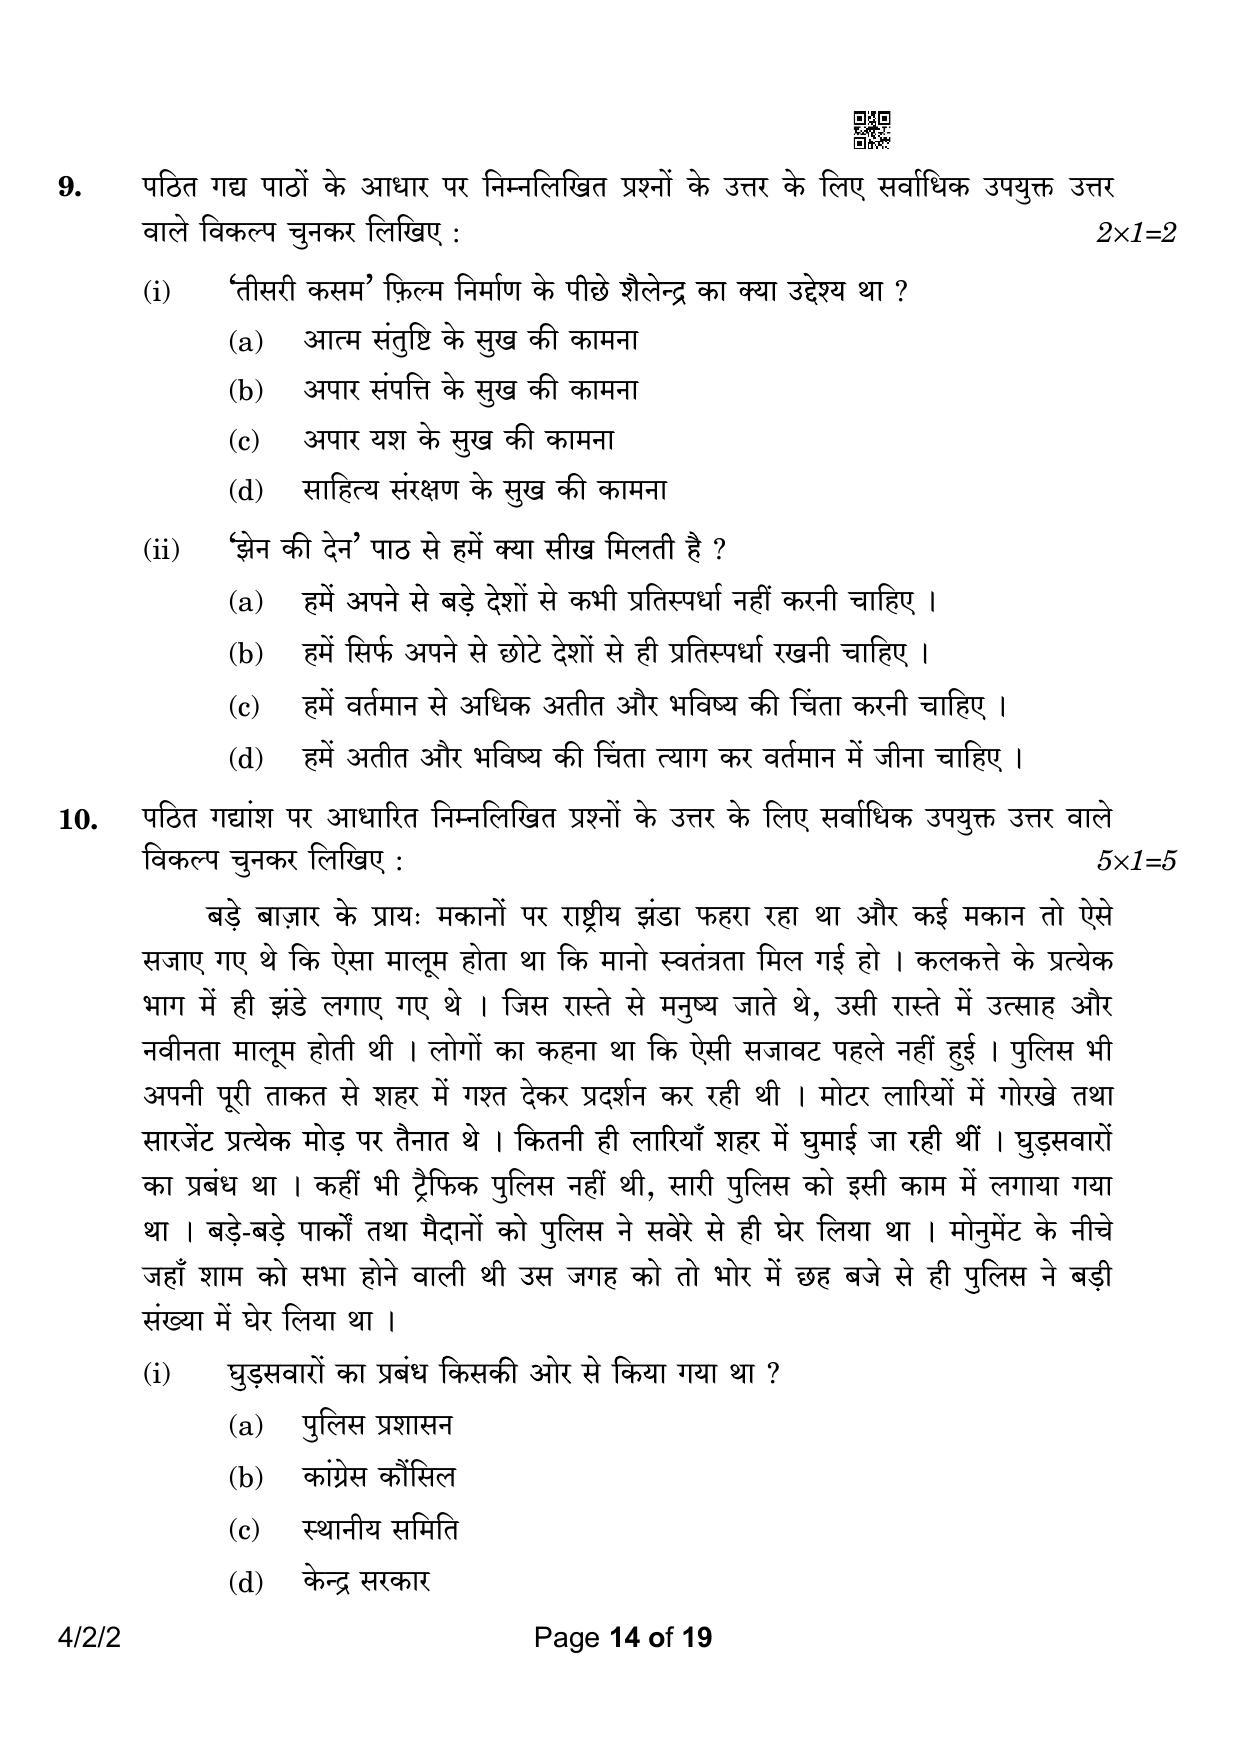 CBSE Class 10 4-2-2 Hindi B 2023 Question Paper - Page 14